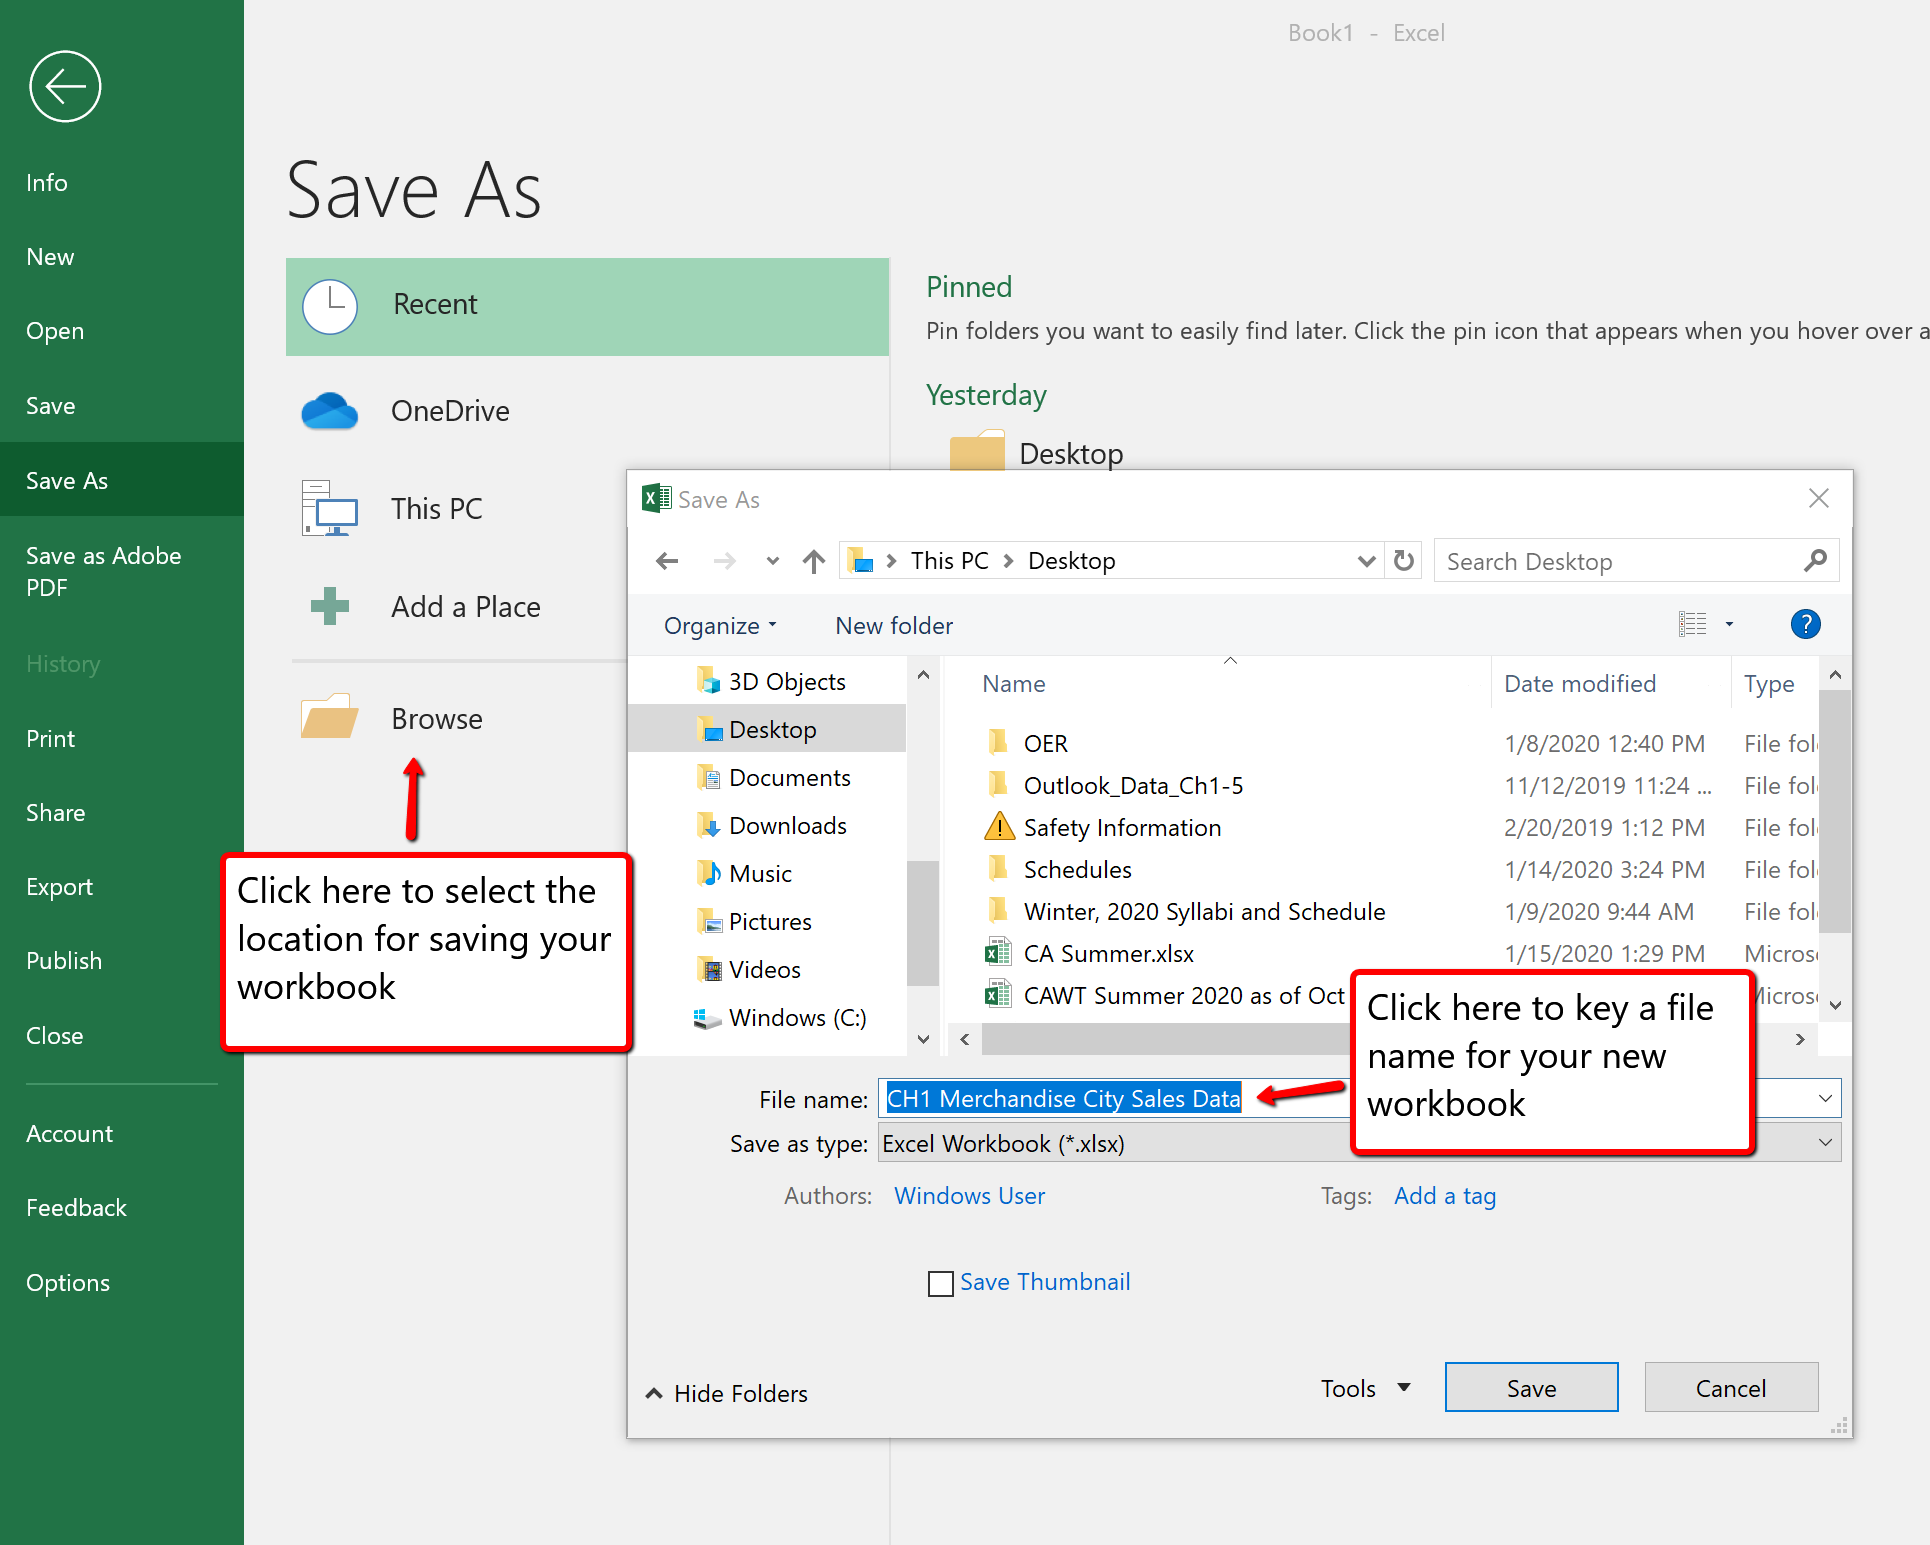 Save As dialog box for Excel 365 featuring saving and naming a workbook.